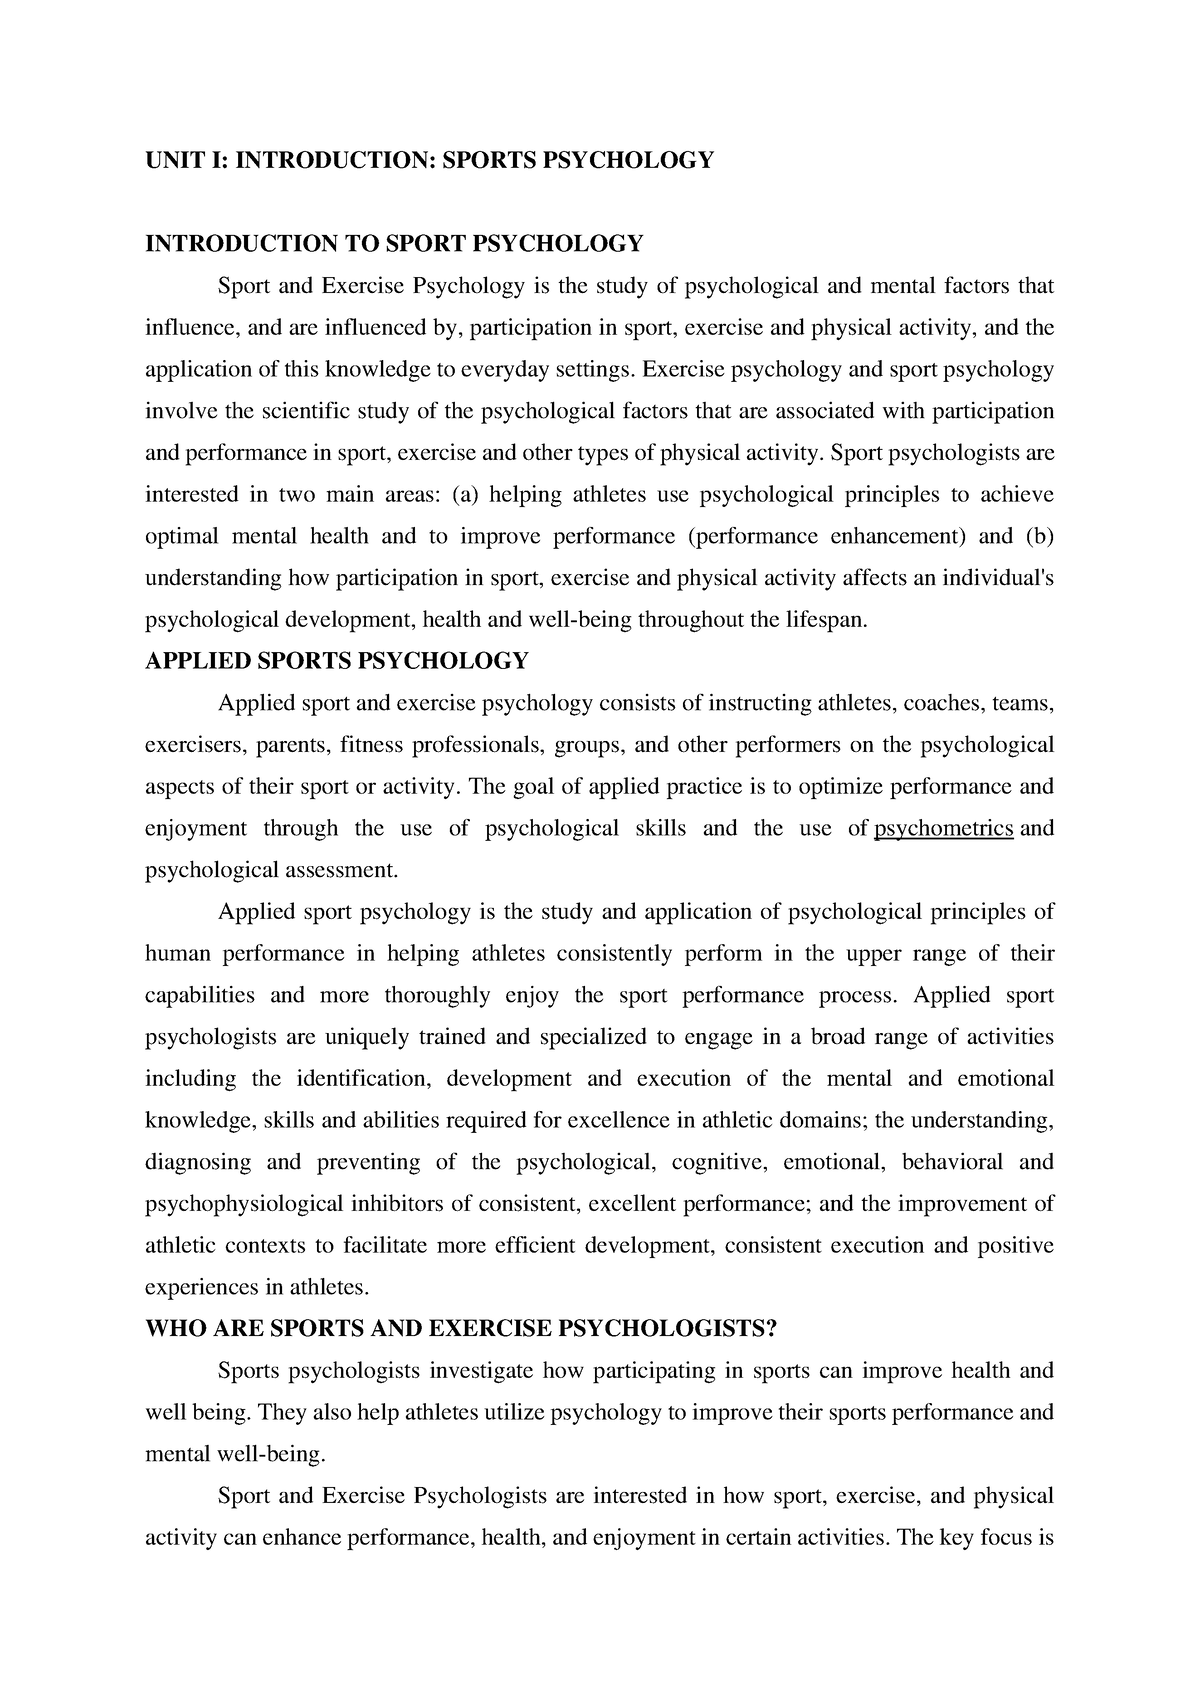 research paper on sports psychologists